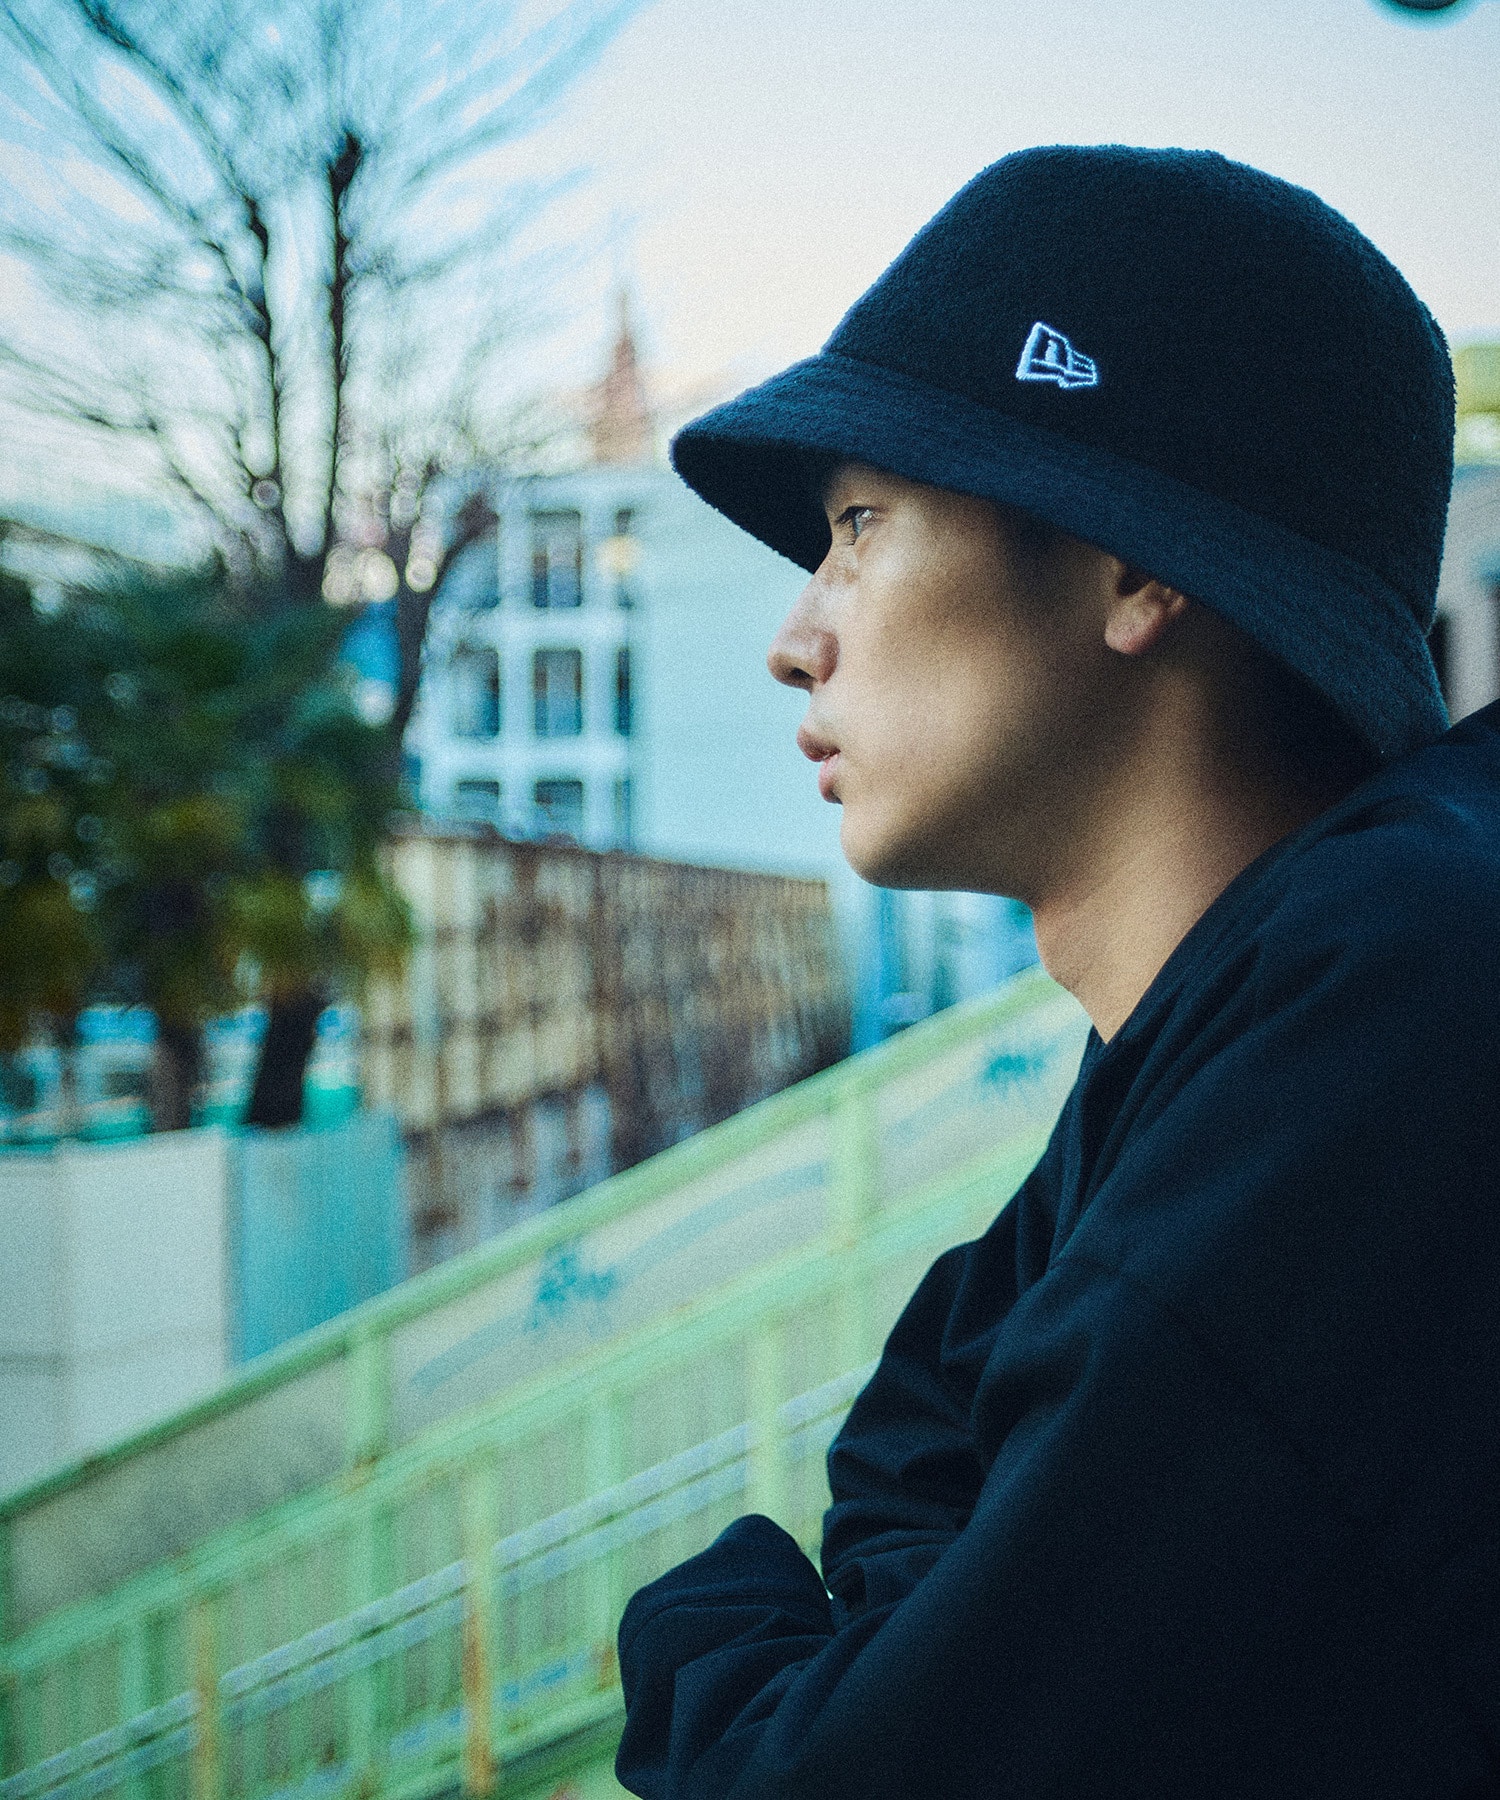 onegravity NEW ERA times; onegravity バケットハット｜ESTNATION ONLINE  STORE｜エストネーション 公式通販